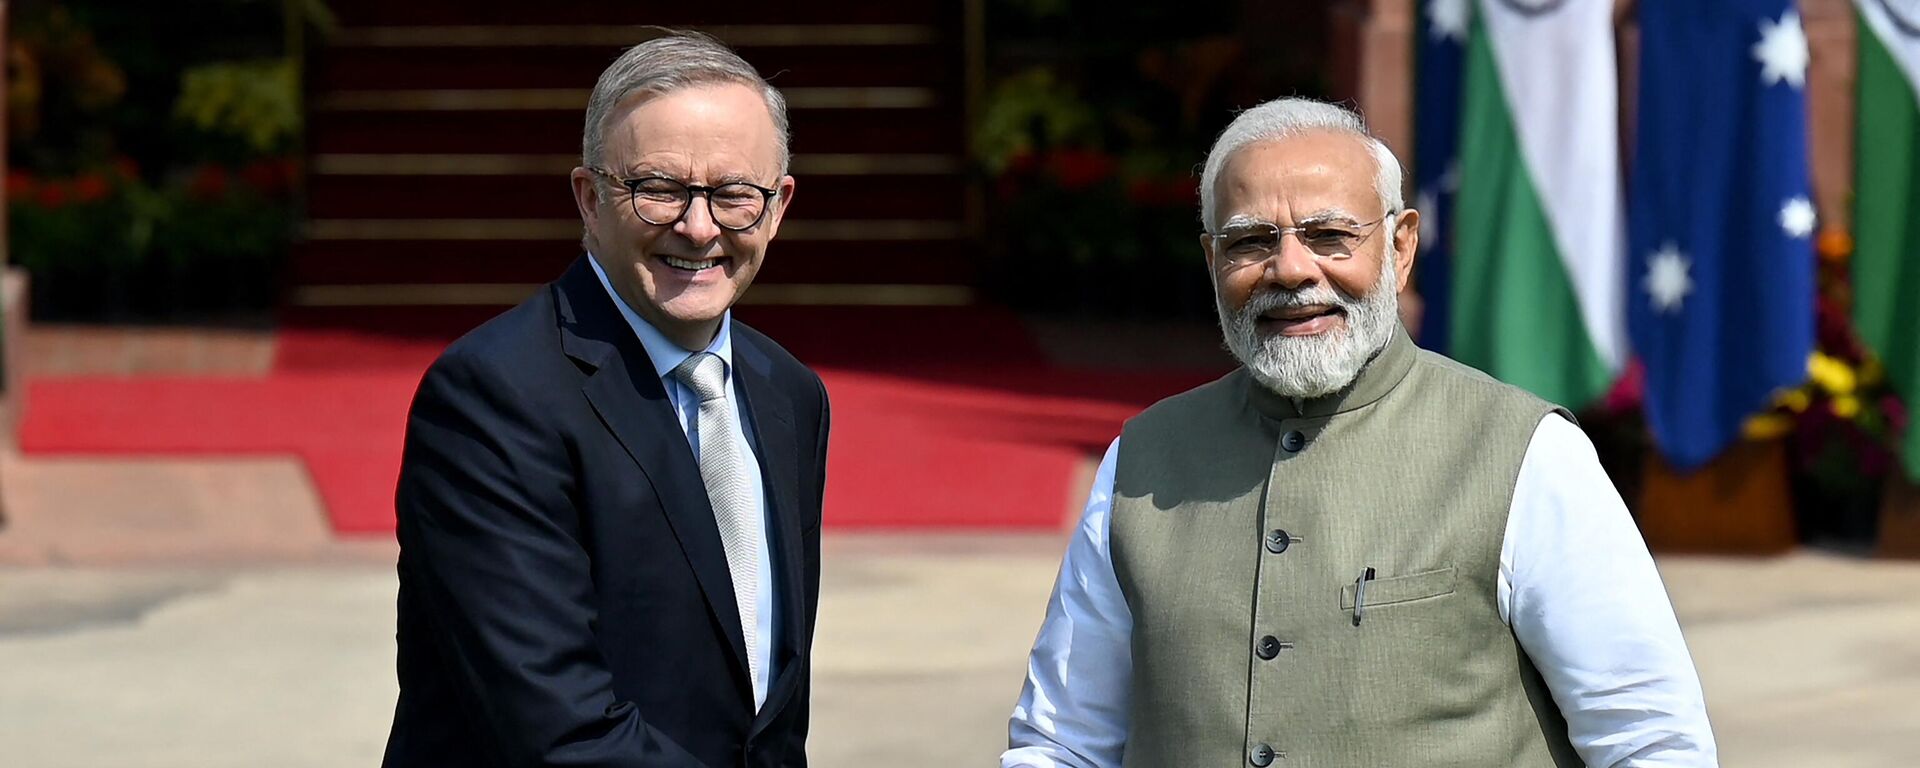 Indian Prime Minister Narendra Modi (R) shakes hands with Australia's Prime Minister Anthony Albanese before a meeting at Hyderabad House, in New Delhi on March 10, 2023.  - Sputnik India, 1920, 10.03.2023